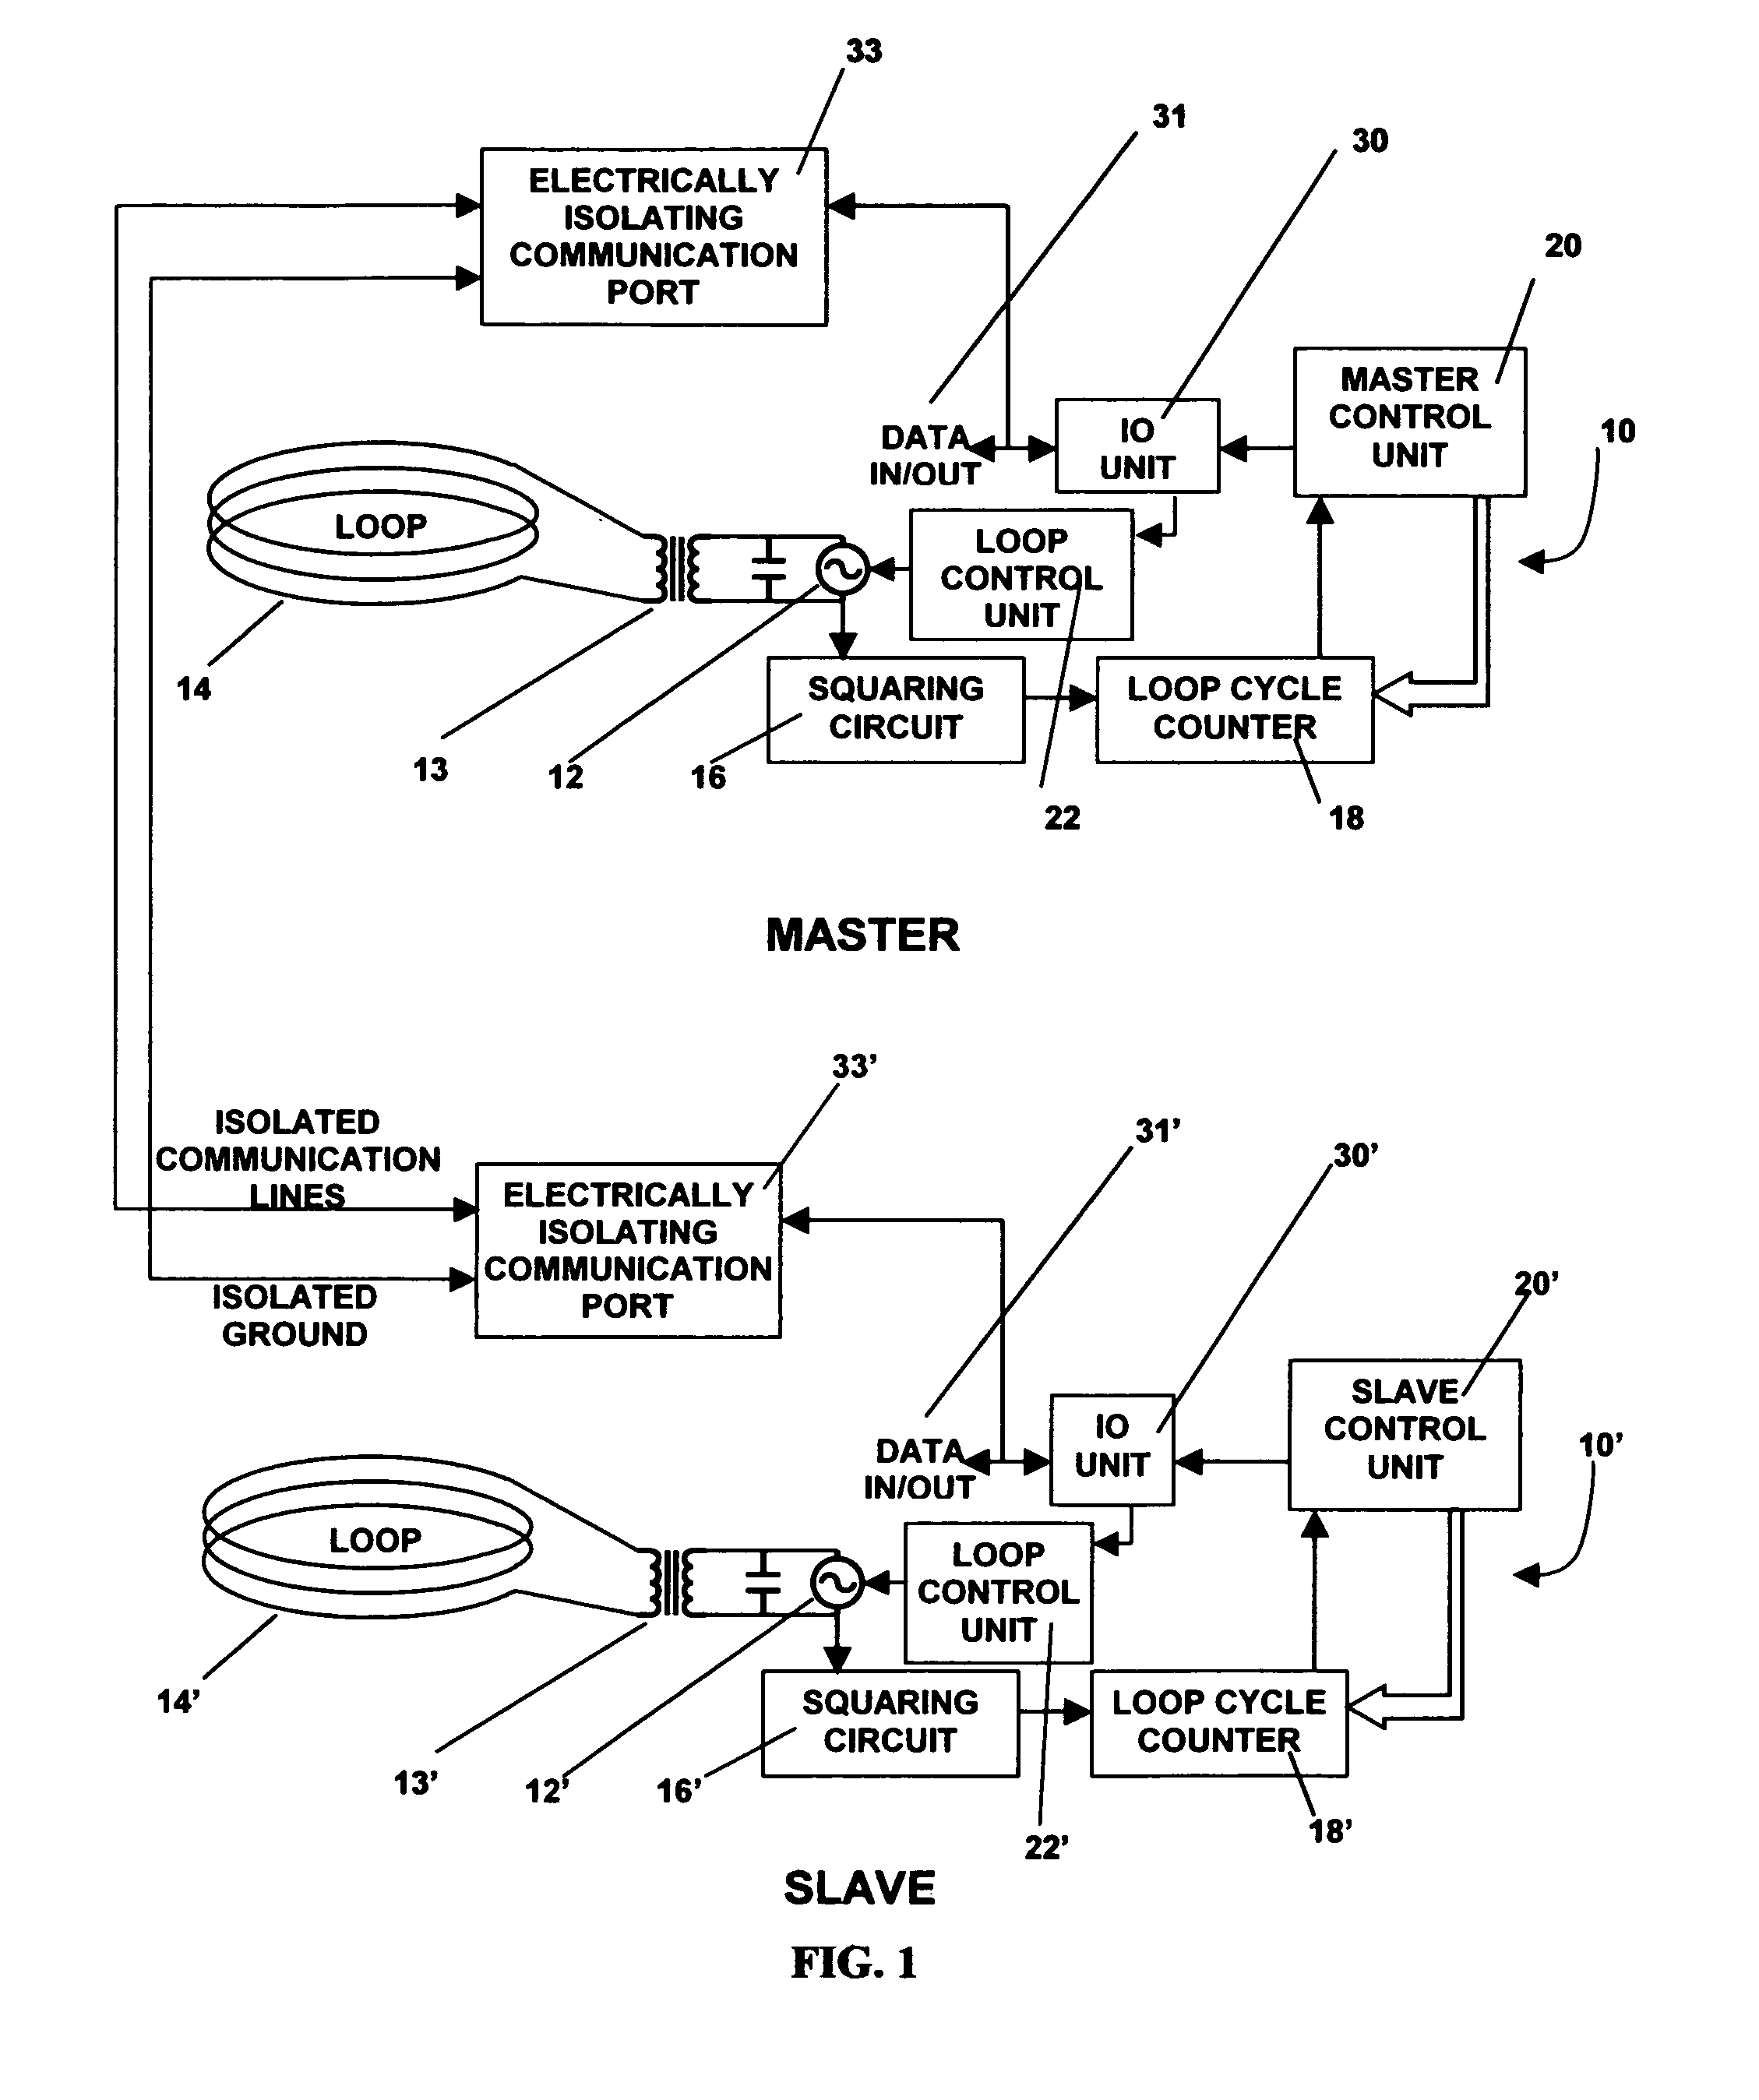 Vehicle detector system with synchronized operation